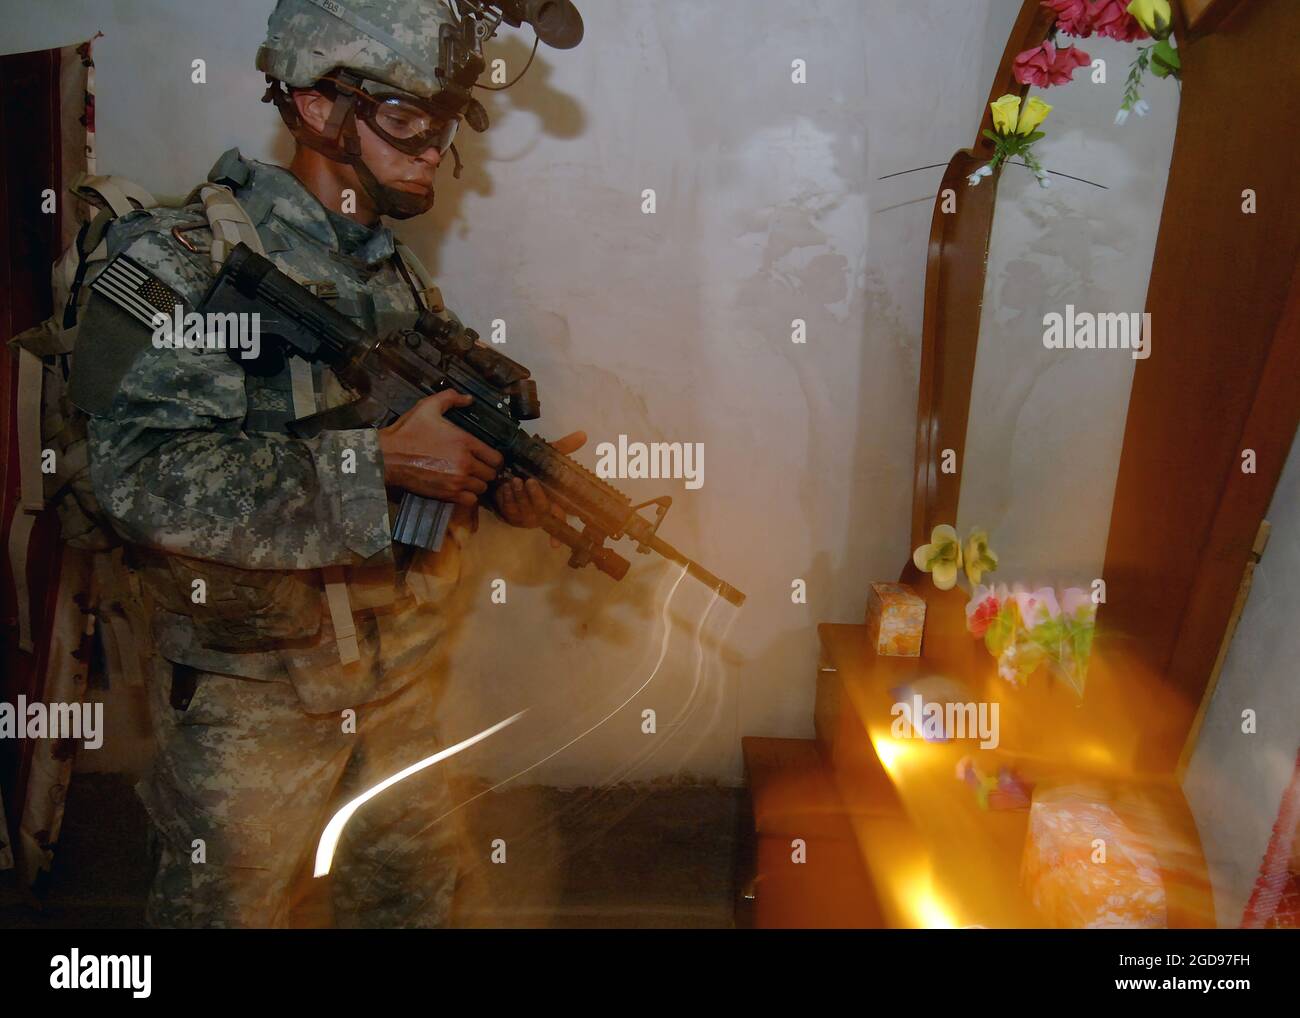 A US Army (USA) Soldier from 7th Squadron (SQN), 10th Cavalry Regiment (CAV REGT), 1st Brigade Combat Team (BCT), 4th Infantry Division (ID), Fort Hood, Texas (TX), searches a residence in Nubai, Iraq, during an air assault mission to search for insurgents and weapons caches during Operation IRAQI FREEDOM. The Soldier is armed with a KAC 5.56 mm Modular Weapon System (MWS) SOPMOD (Special Operation Peculiar Modification) M4.  (US NAVY PHOTO BY MC1(AW) MICHAEL LARSON 060703-N-6901L-069) Stock Photo